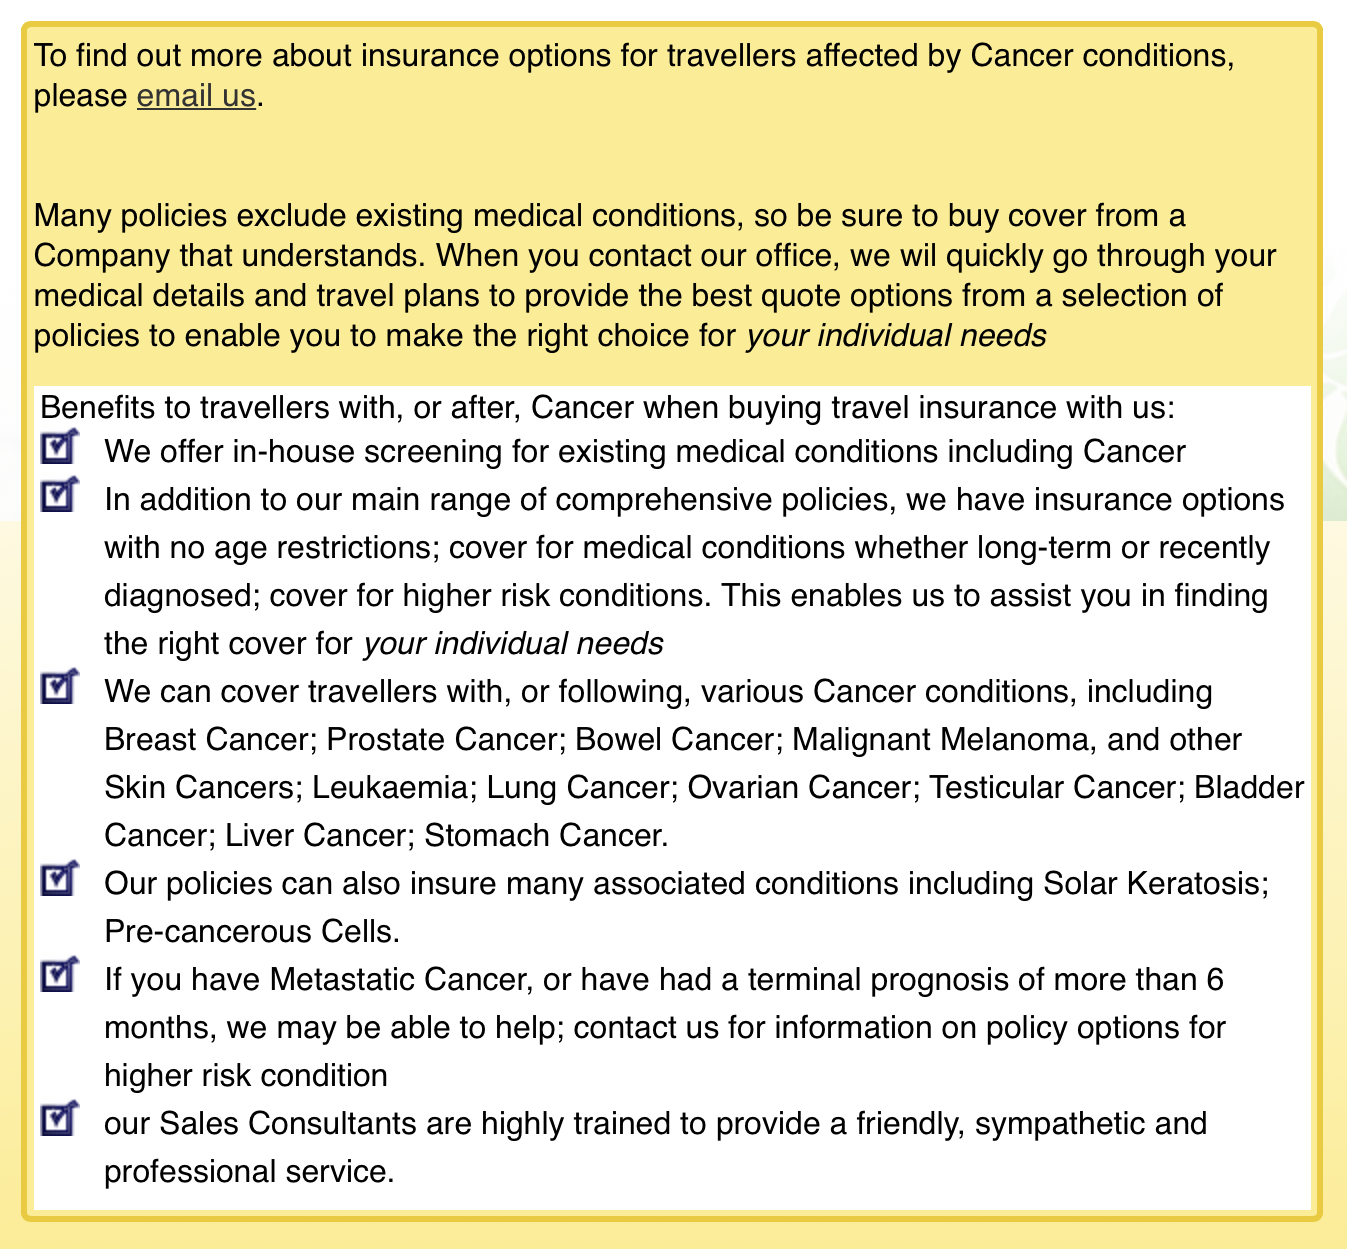 Travel Insurance for Cancer Patients Image